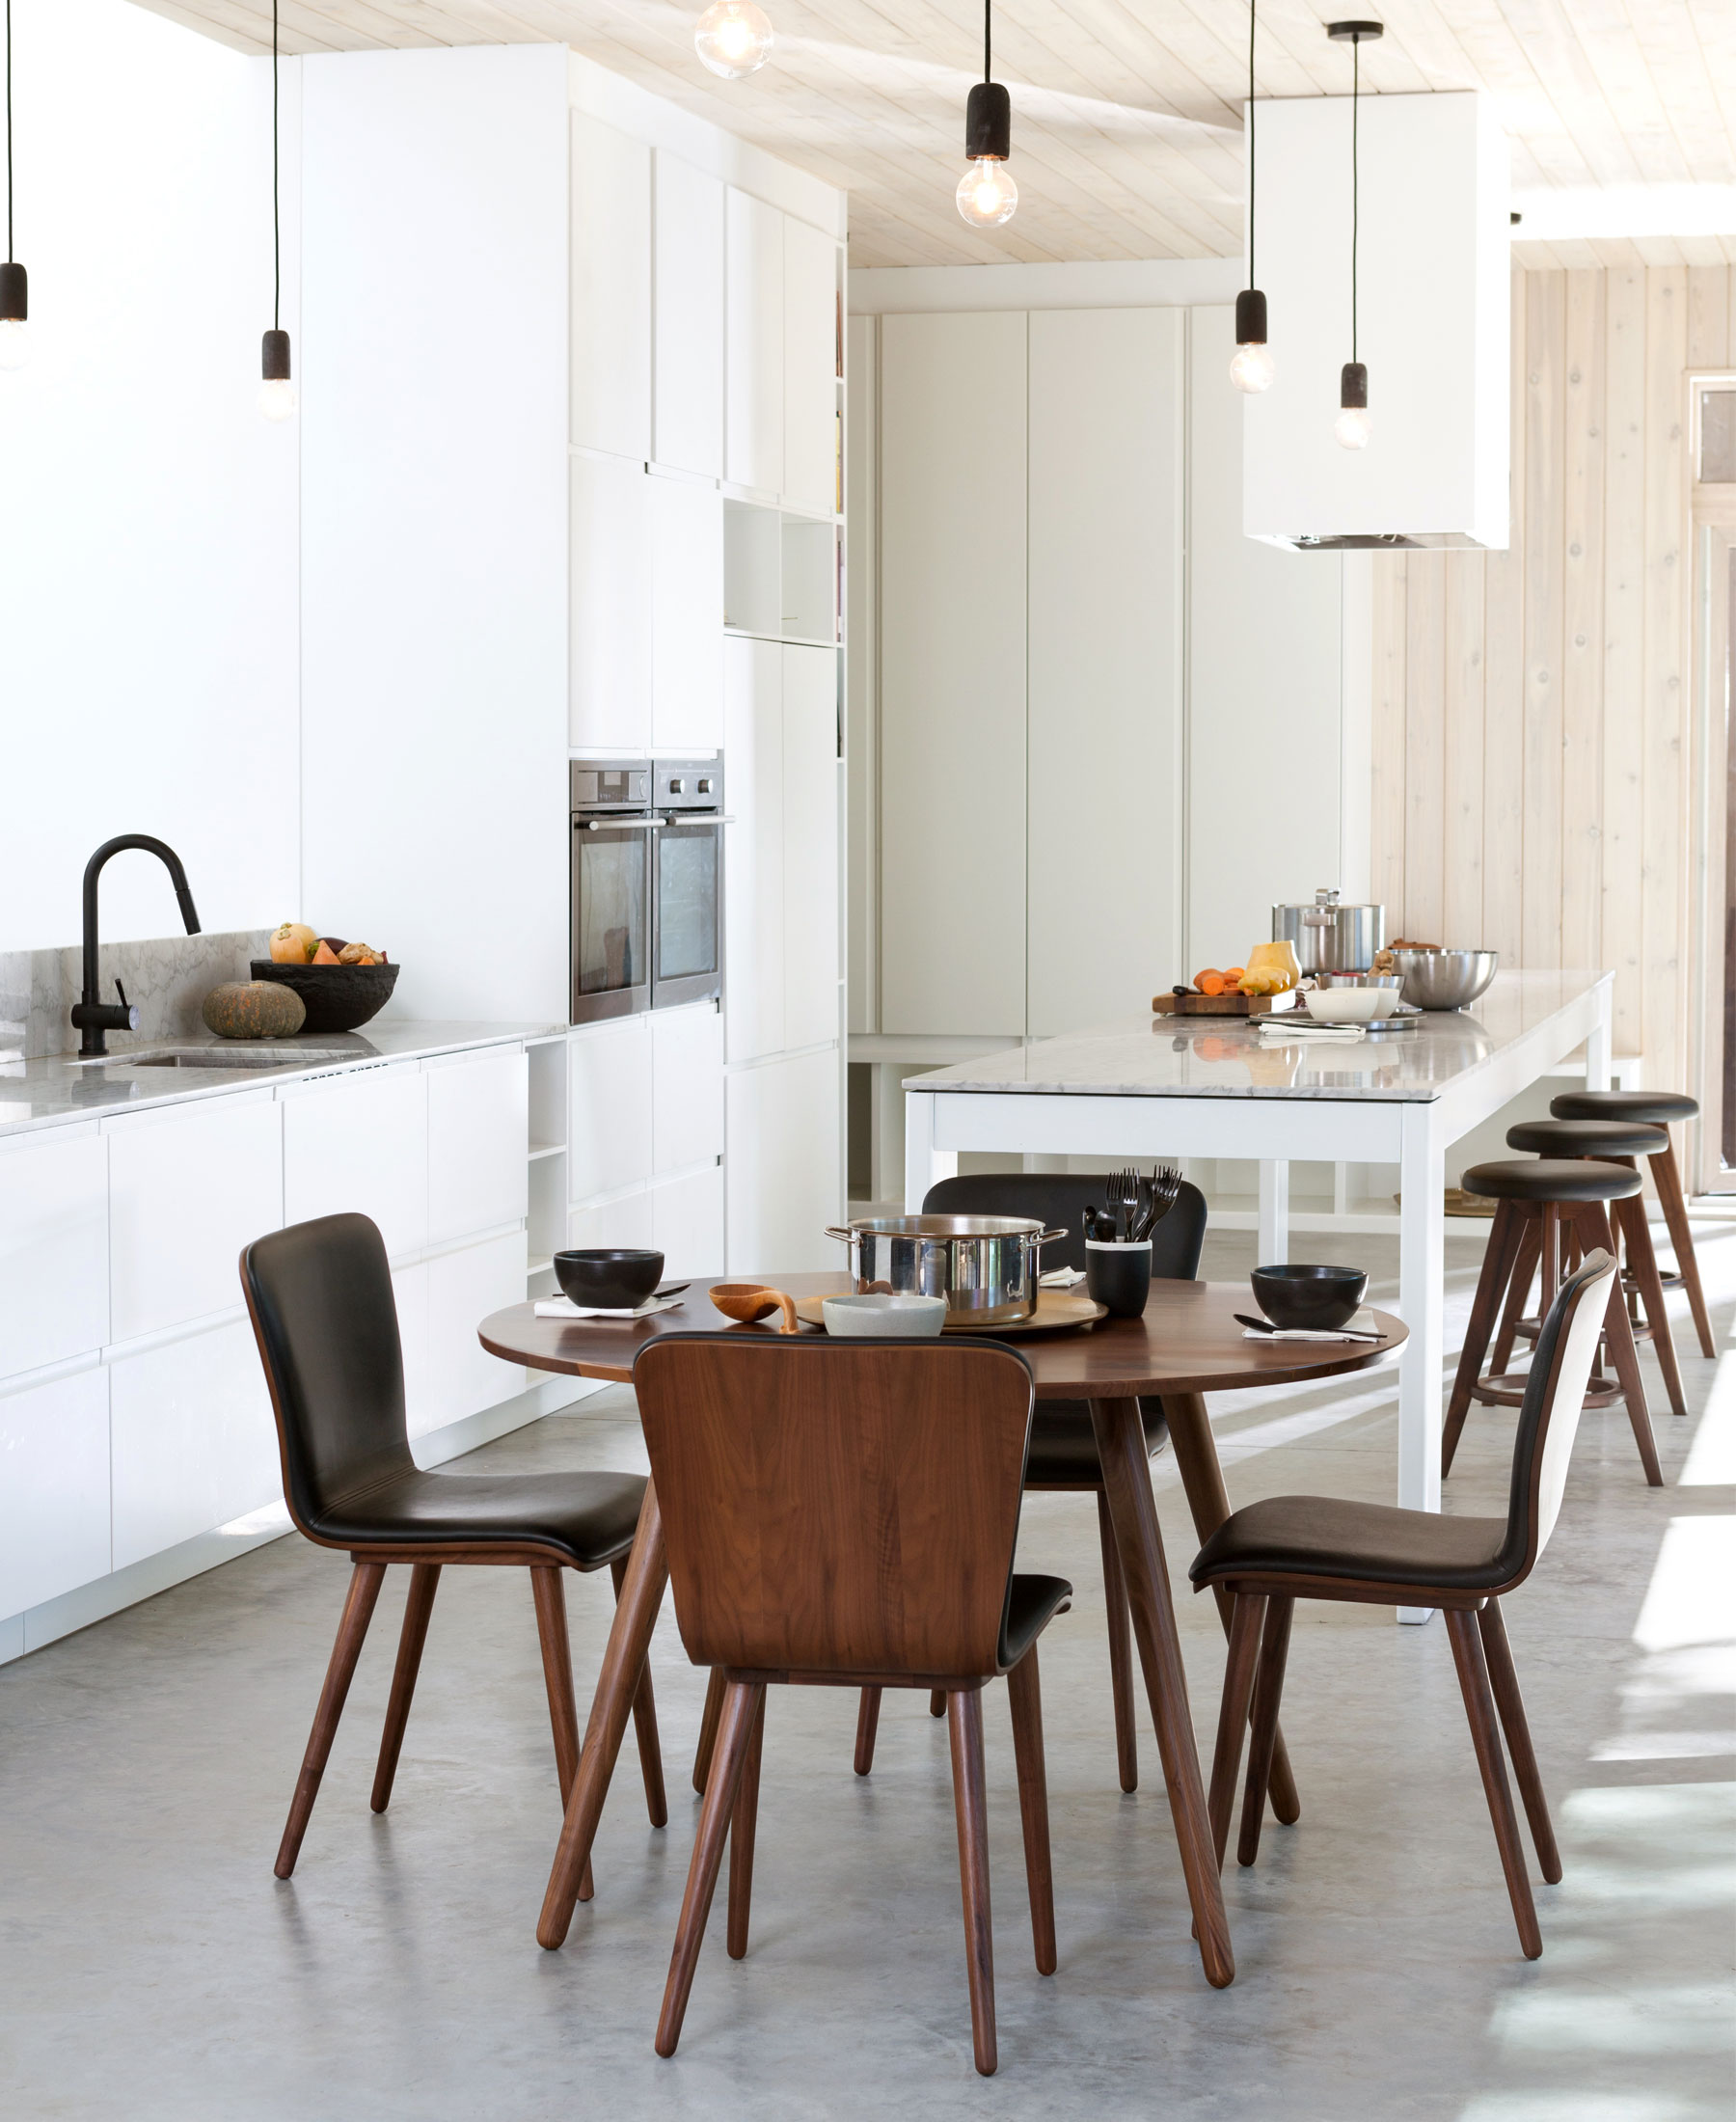 A modern Scandinavian-inspired open-concept kitchen and dining area.